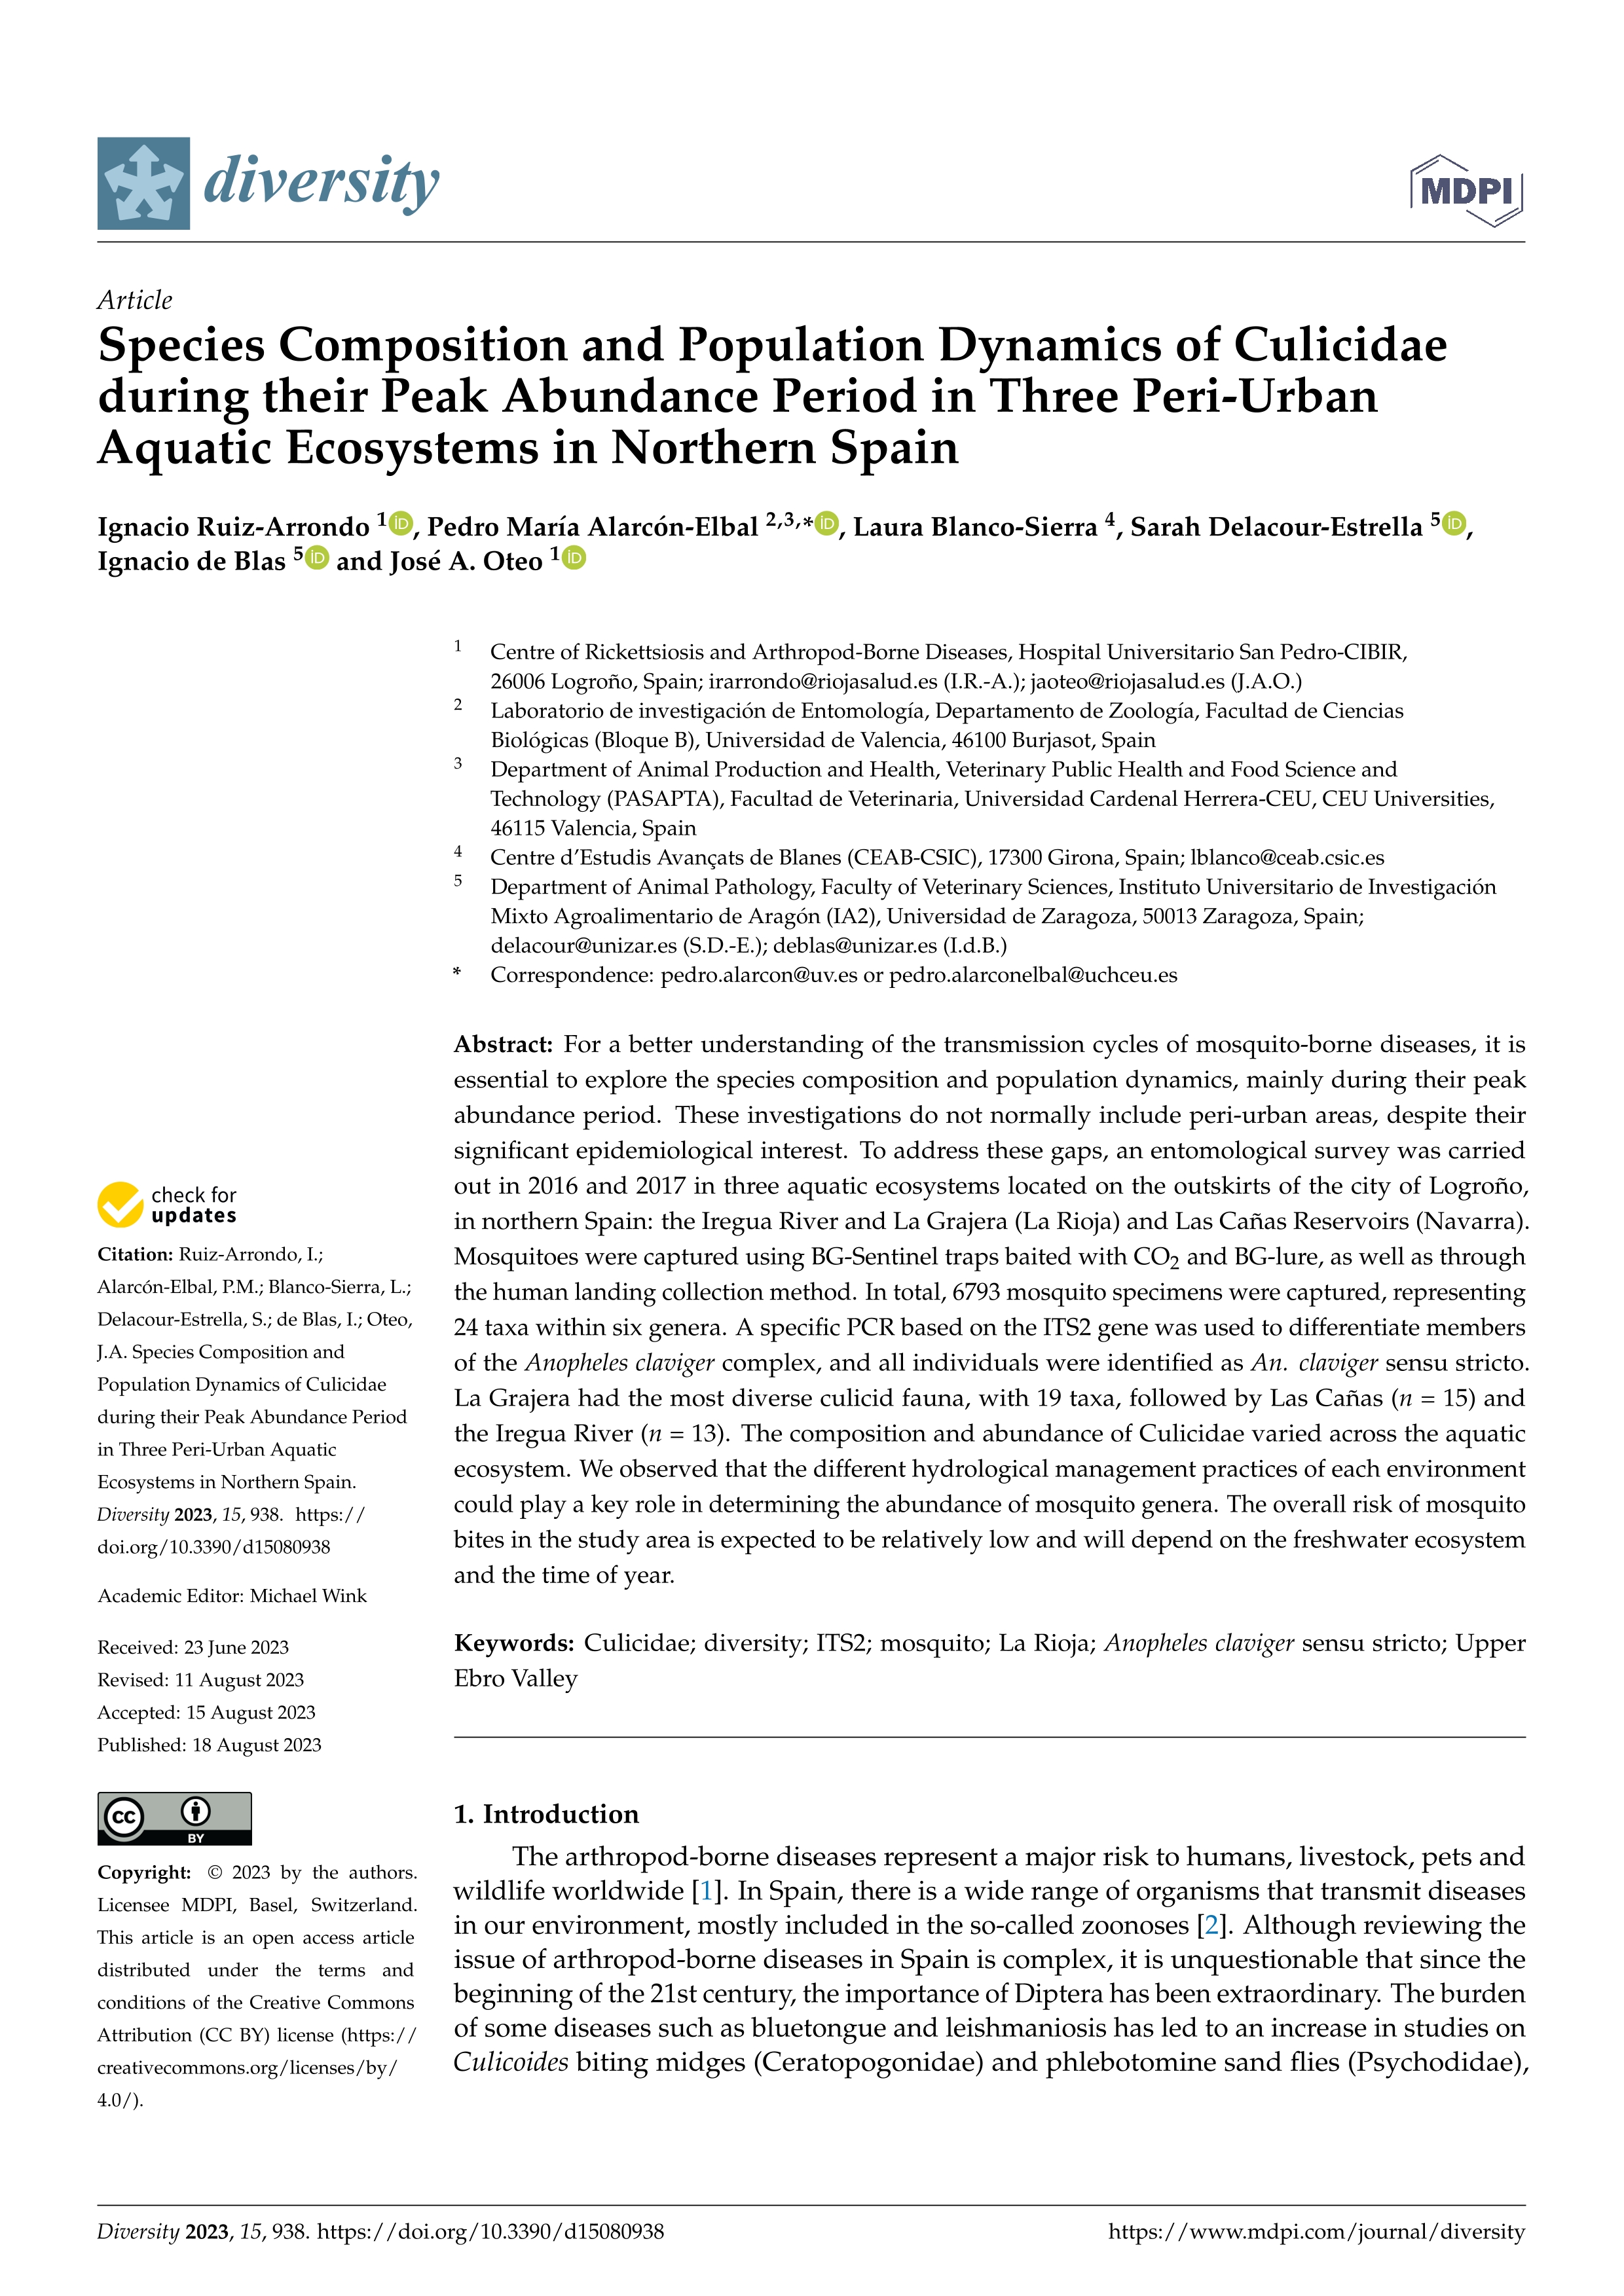 Species composition and population dynamics of culicidae during their peak abundance period in three peri-urban aquatic ecosystems in northern Spain